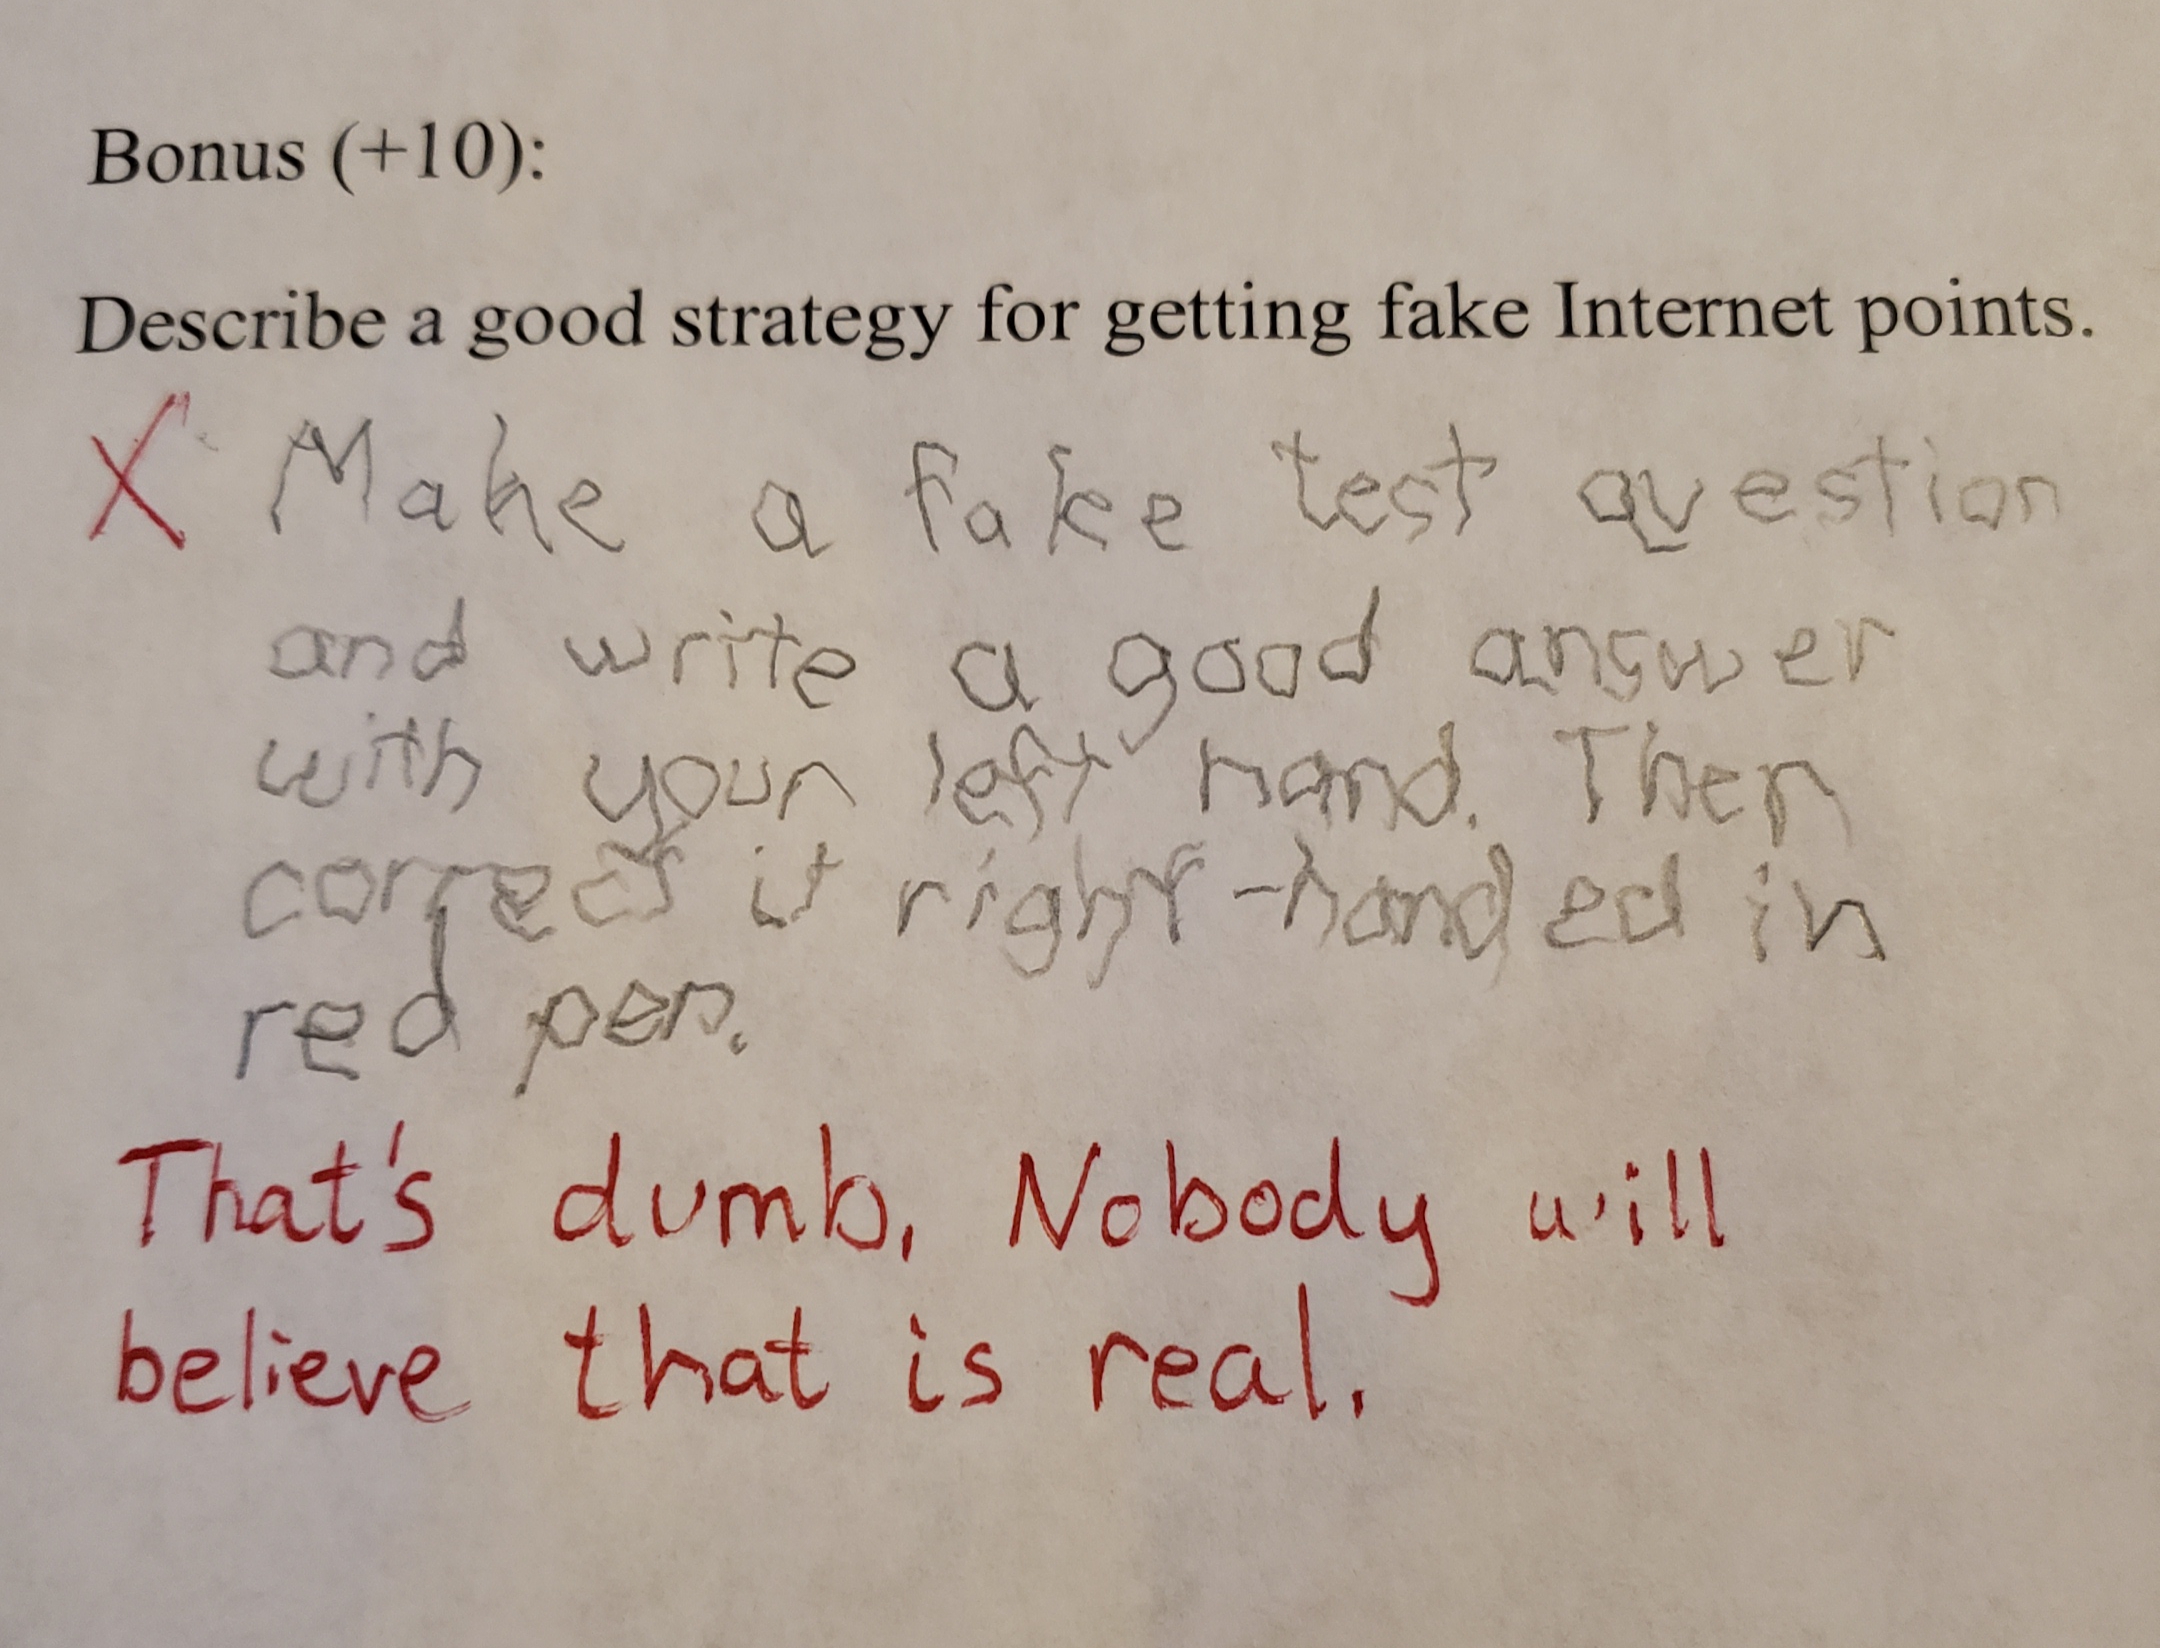 handwriting - Bonus 10 Describe a good strategy for getting fake Internet points. X Make a fake test question and write a good answer with your left hand. Then corget it right handed in red pen. That's dumb, Nobody will believe that is real,